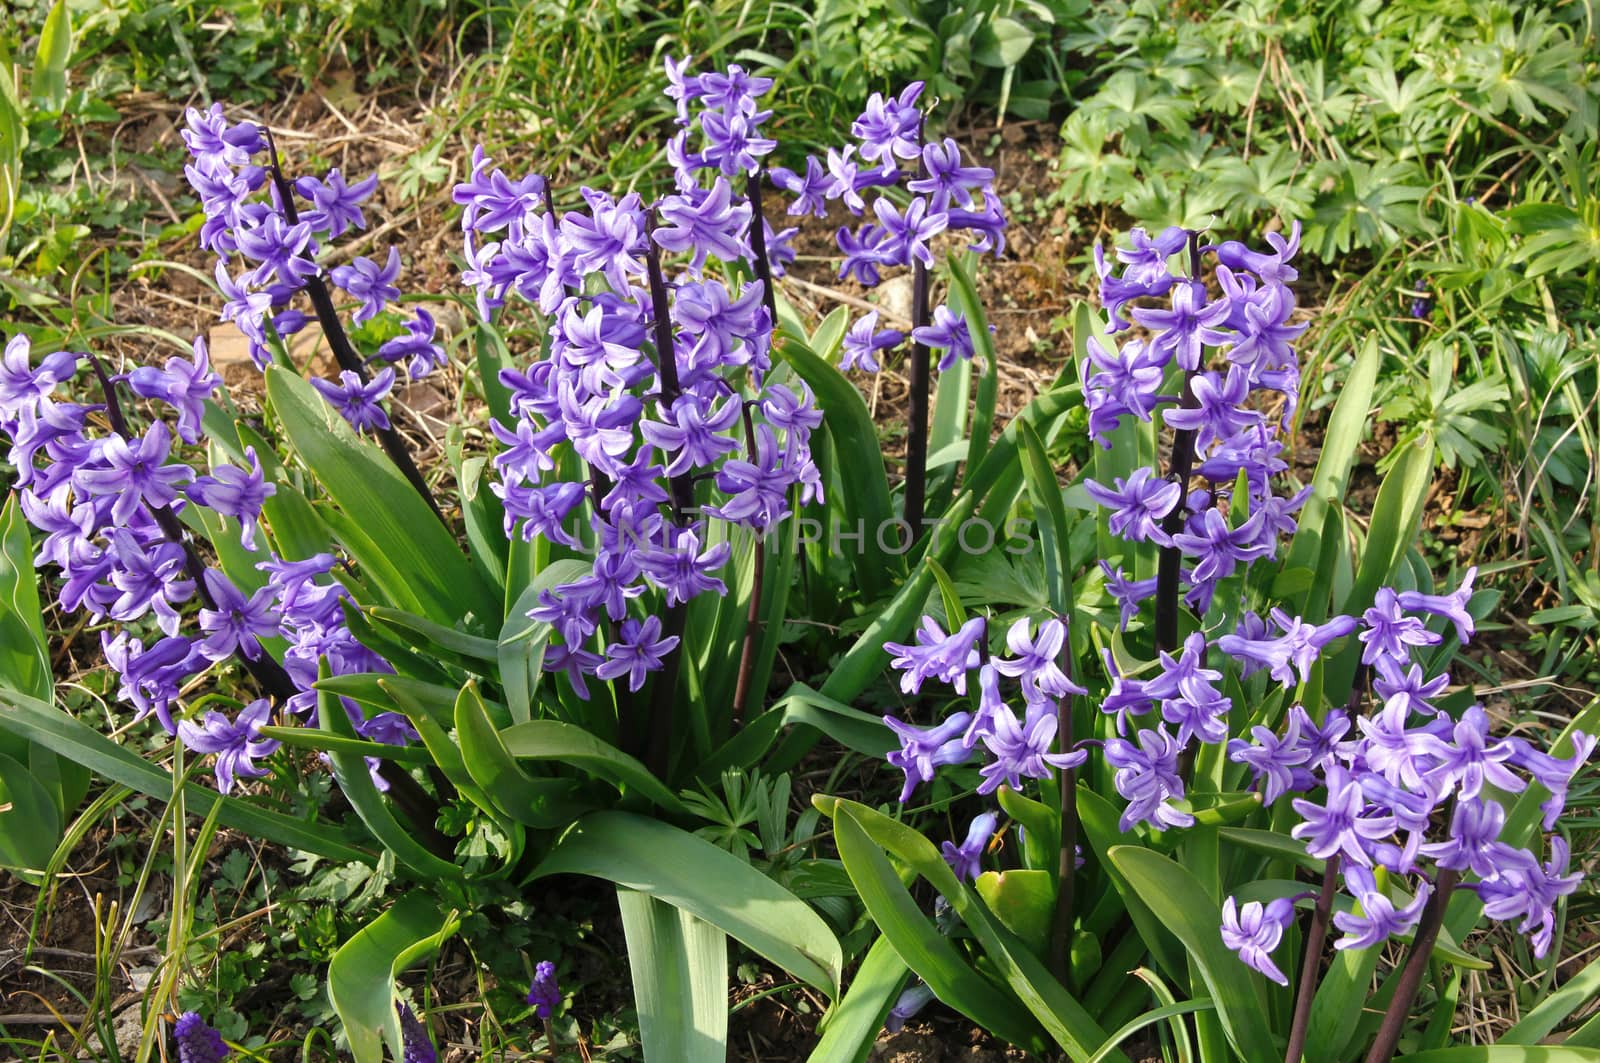 Purple hyacinths (hyacinthus) is one of the first beautiful spri by oxanatravel